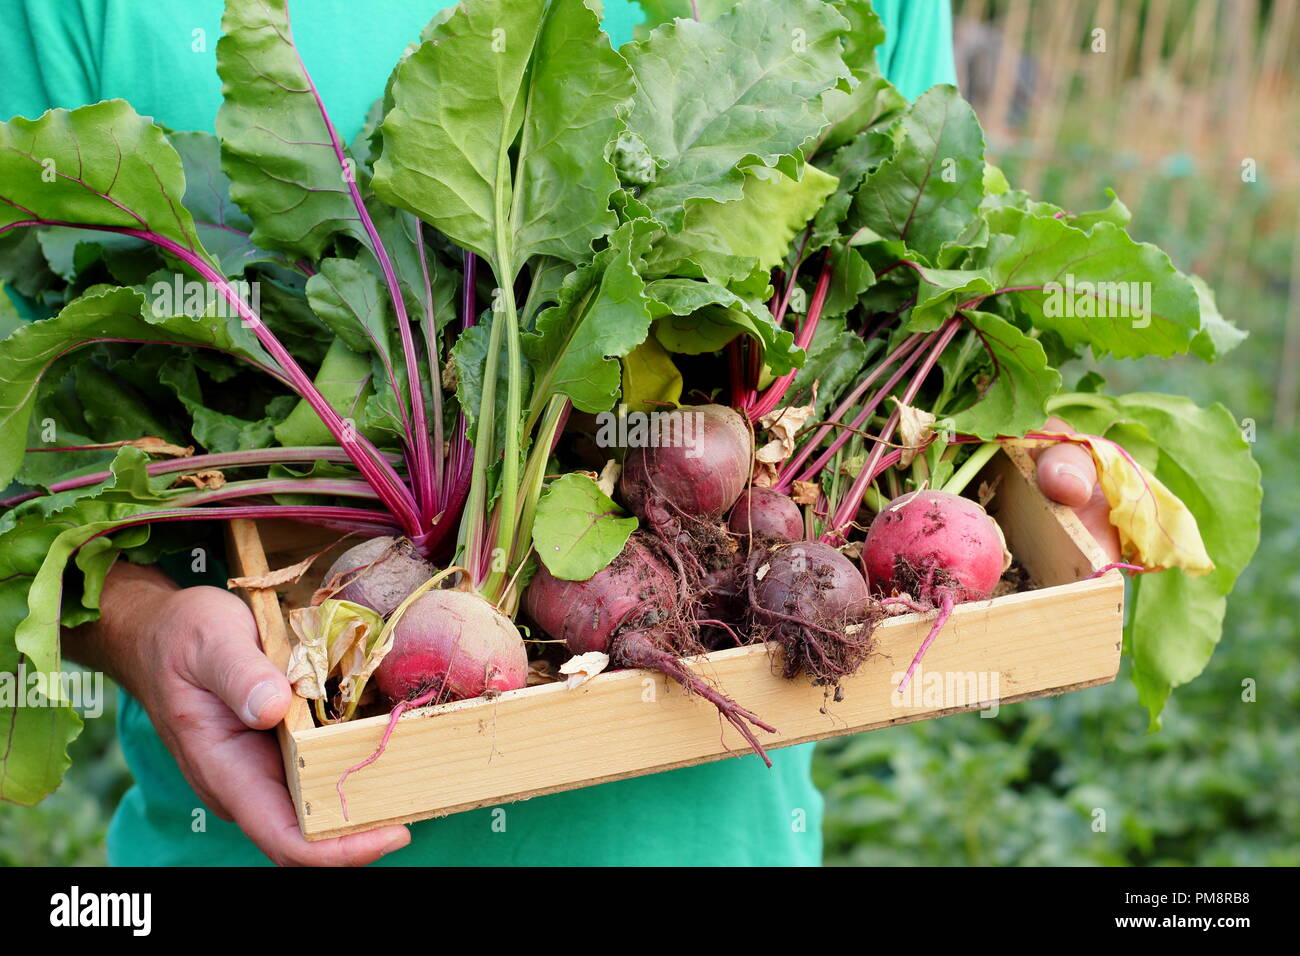 Beta vulgaris. Male holding freshly harvested homegrown Boltardy and Chioggia beetroot varieties in a wooden tray, July, UK Stock Photo